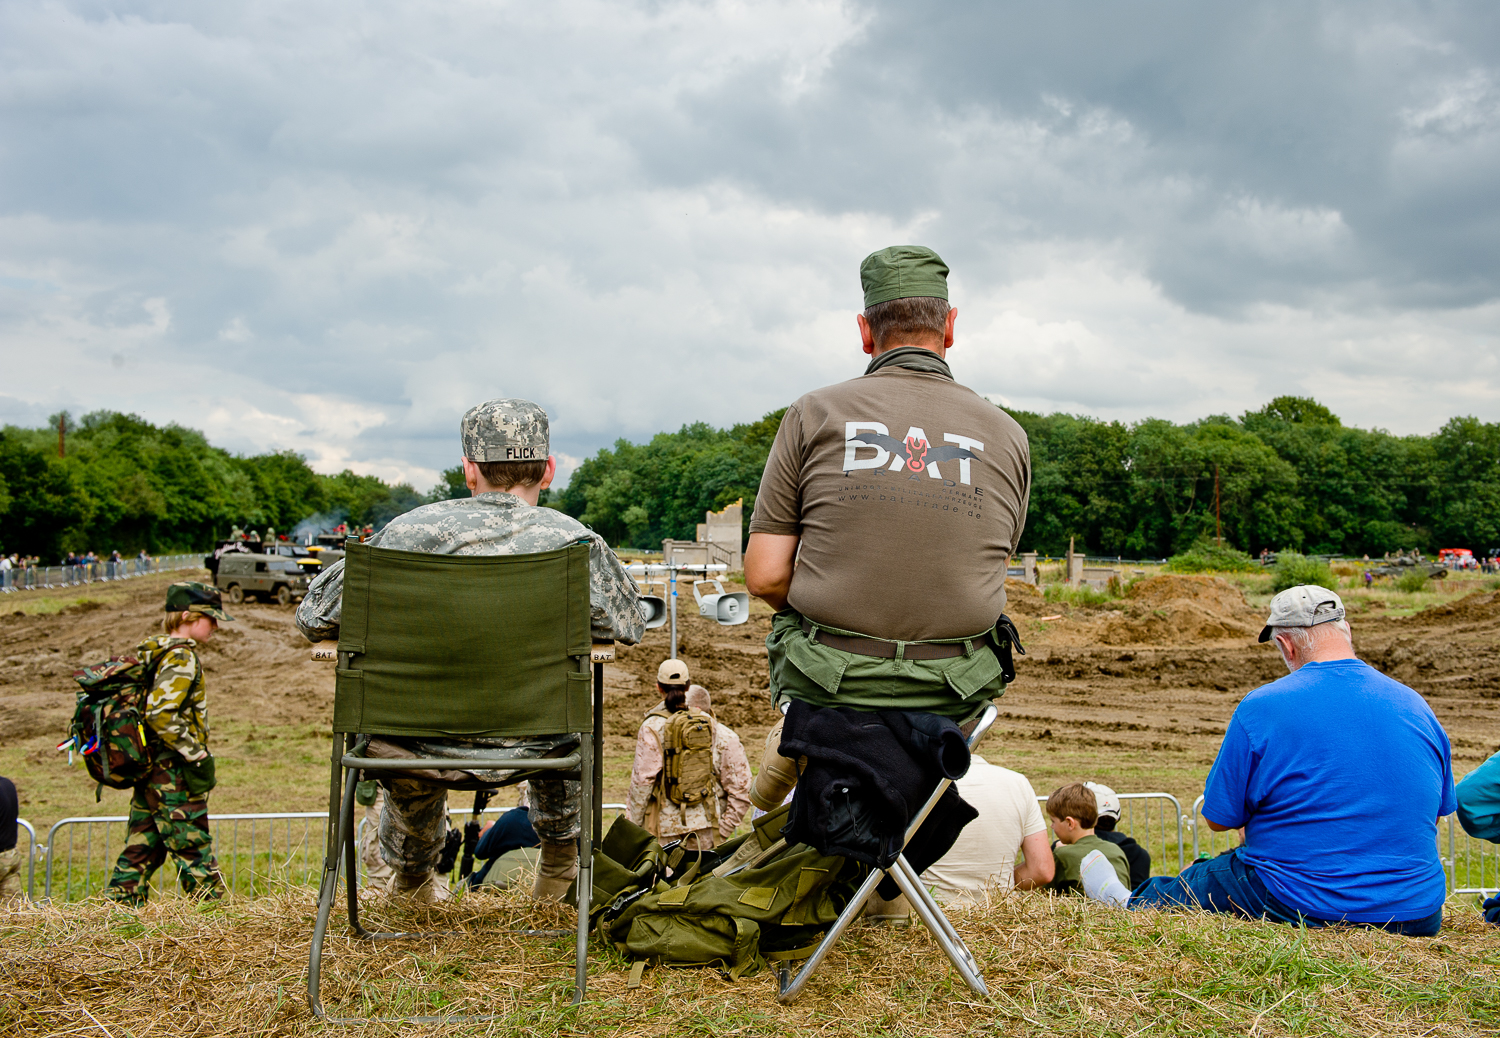  Father and son watching re-enactment of battle, War and Peace show, Kent 